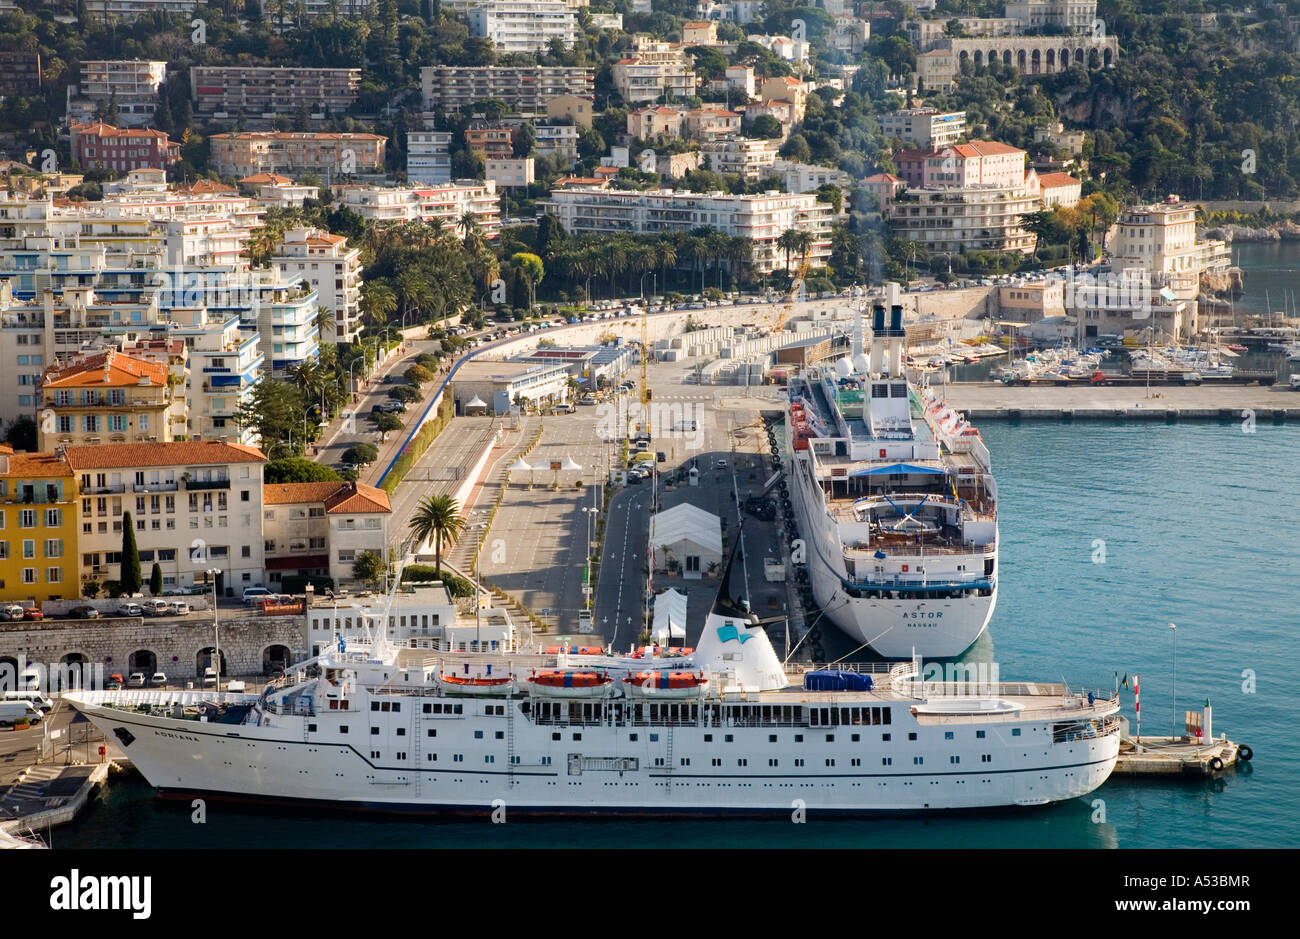 Liners docked at the Port Du Commerce in Nice, Southern France. Stock Photo